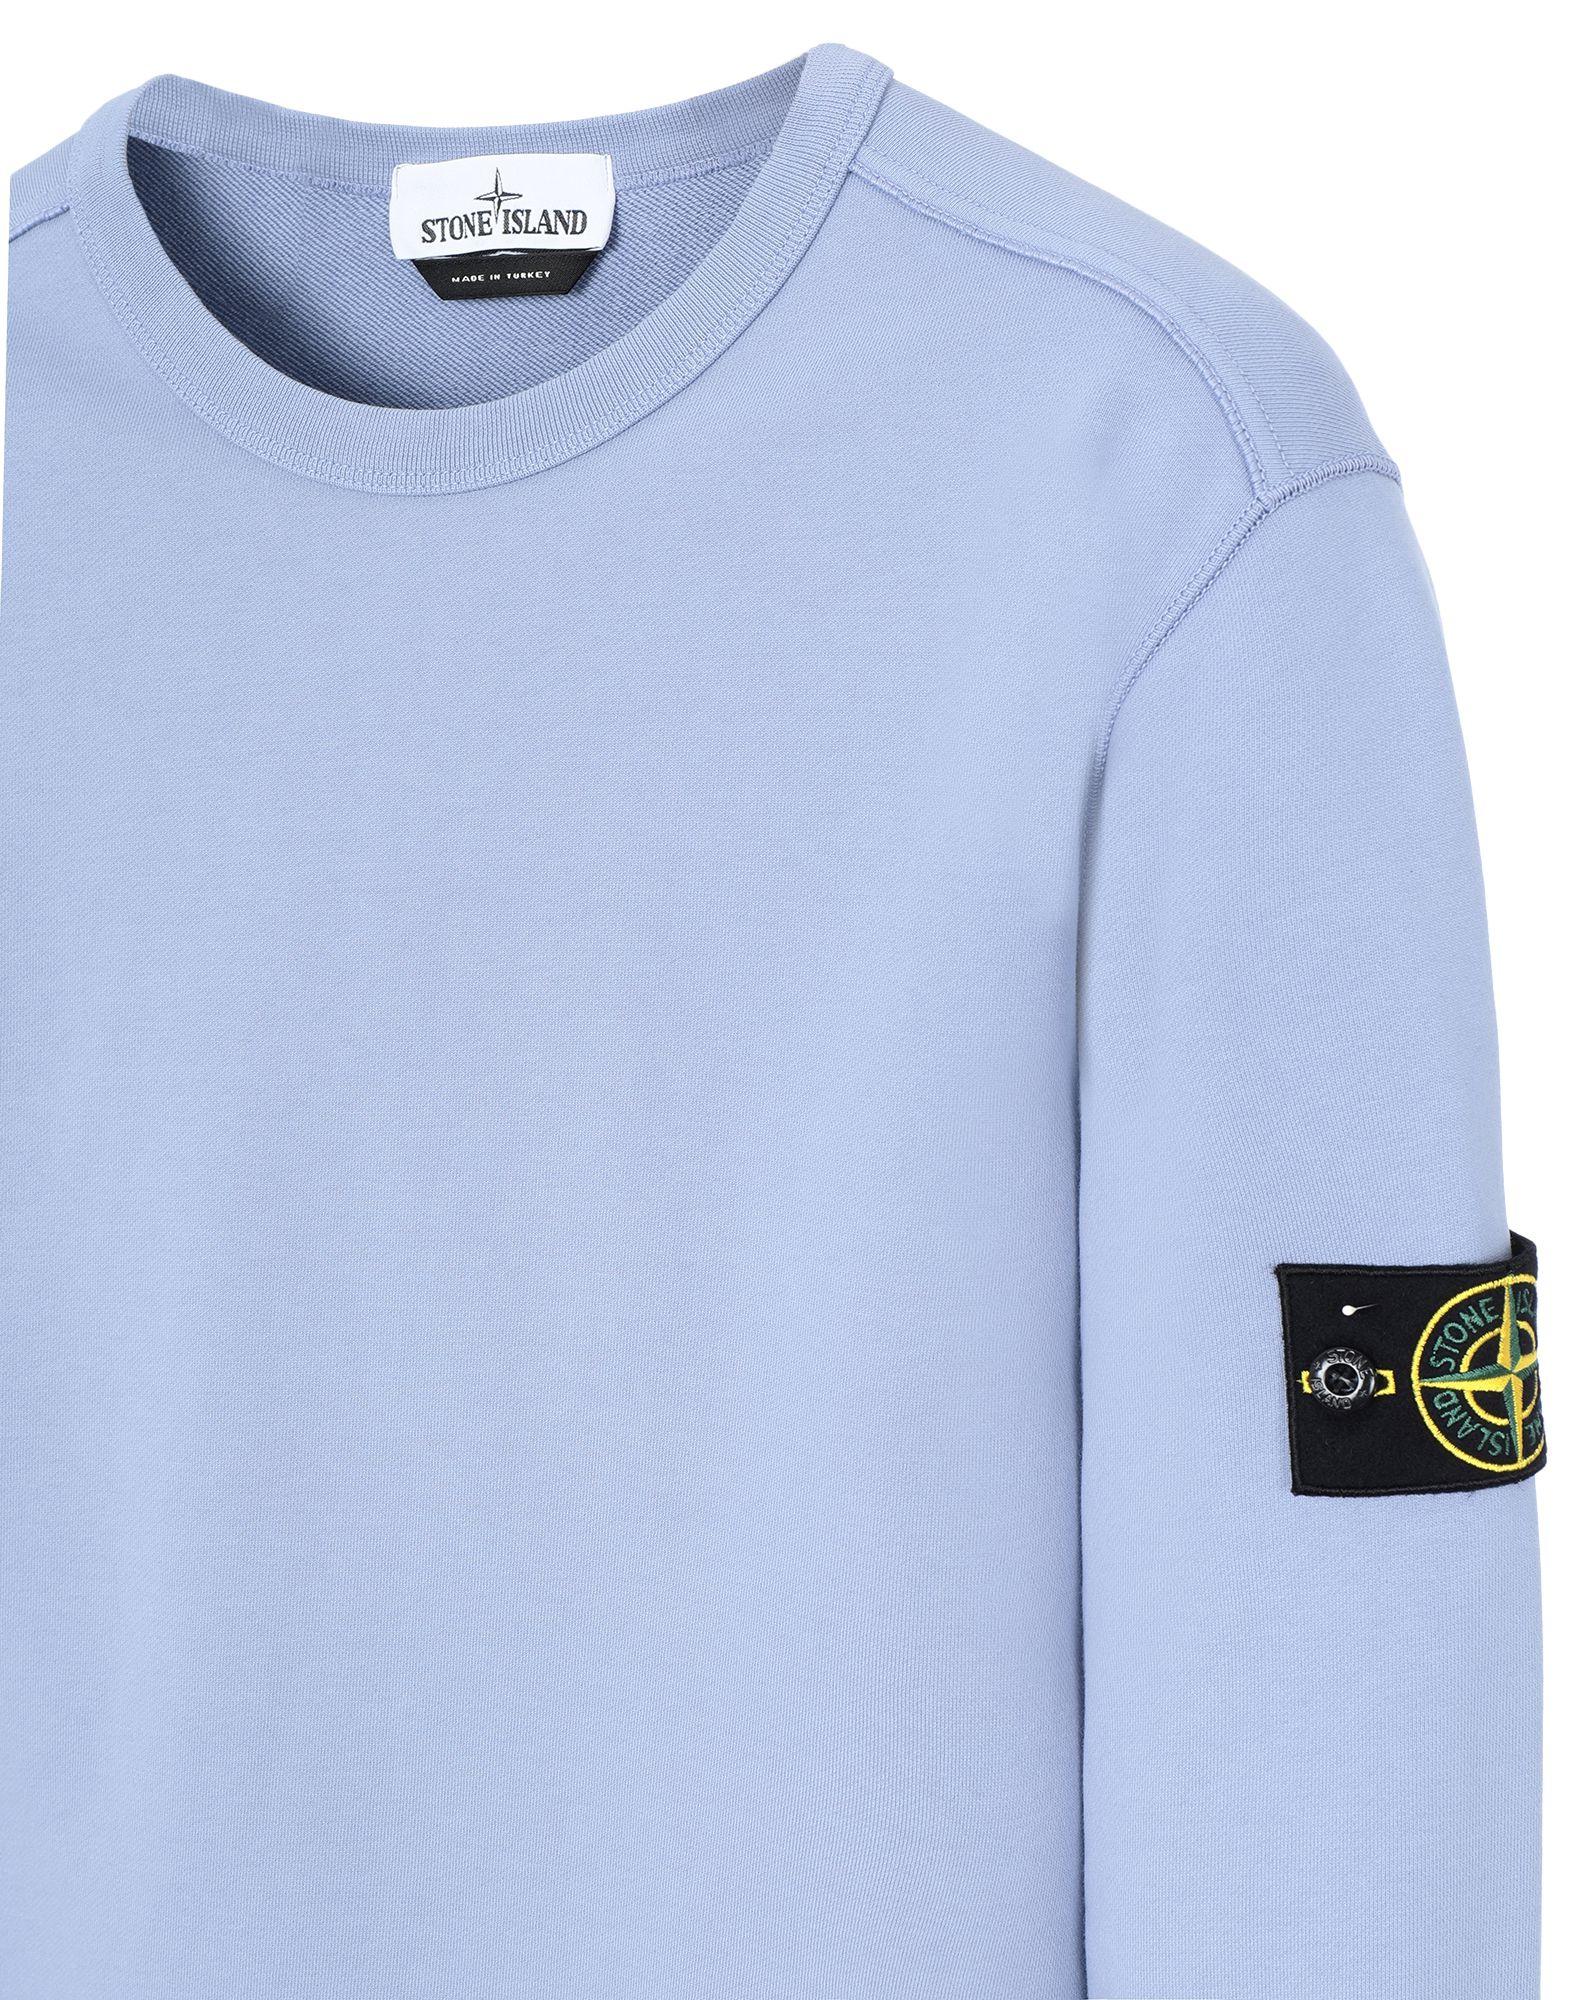 Stone Island Lavender Crew Neck, Buy Now, Hotsell, 58% OFF,  www.chocomuseo.com